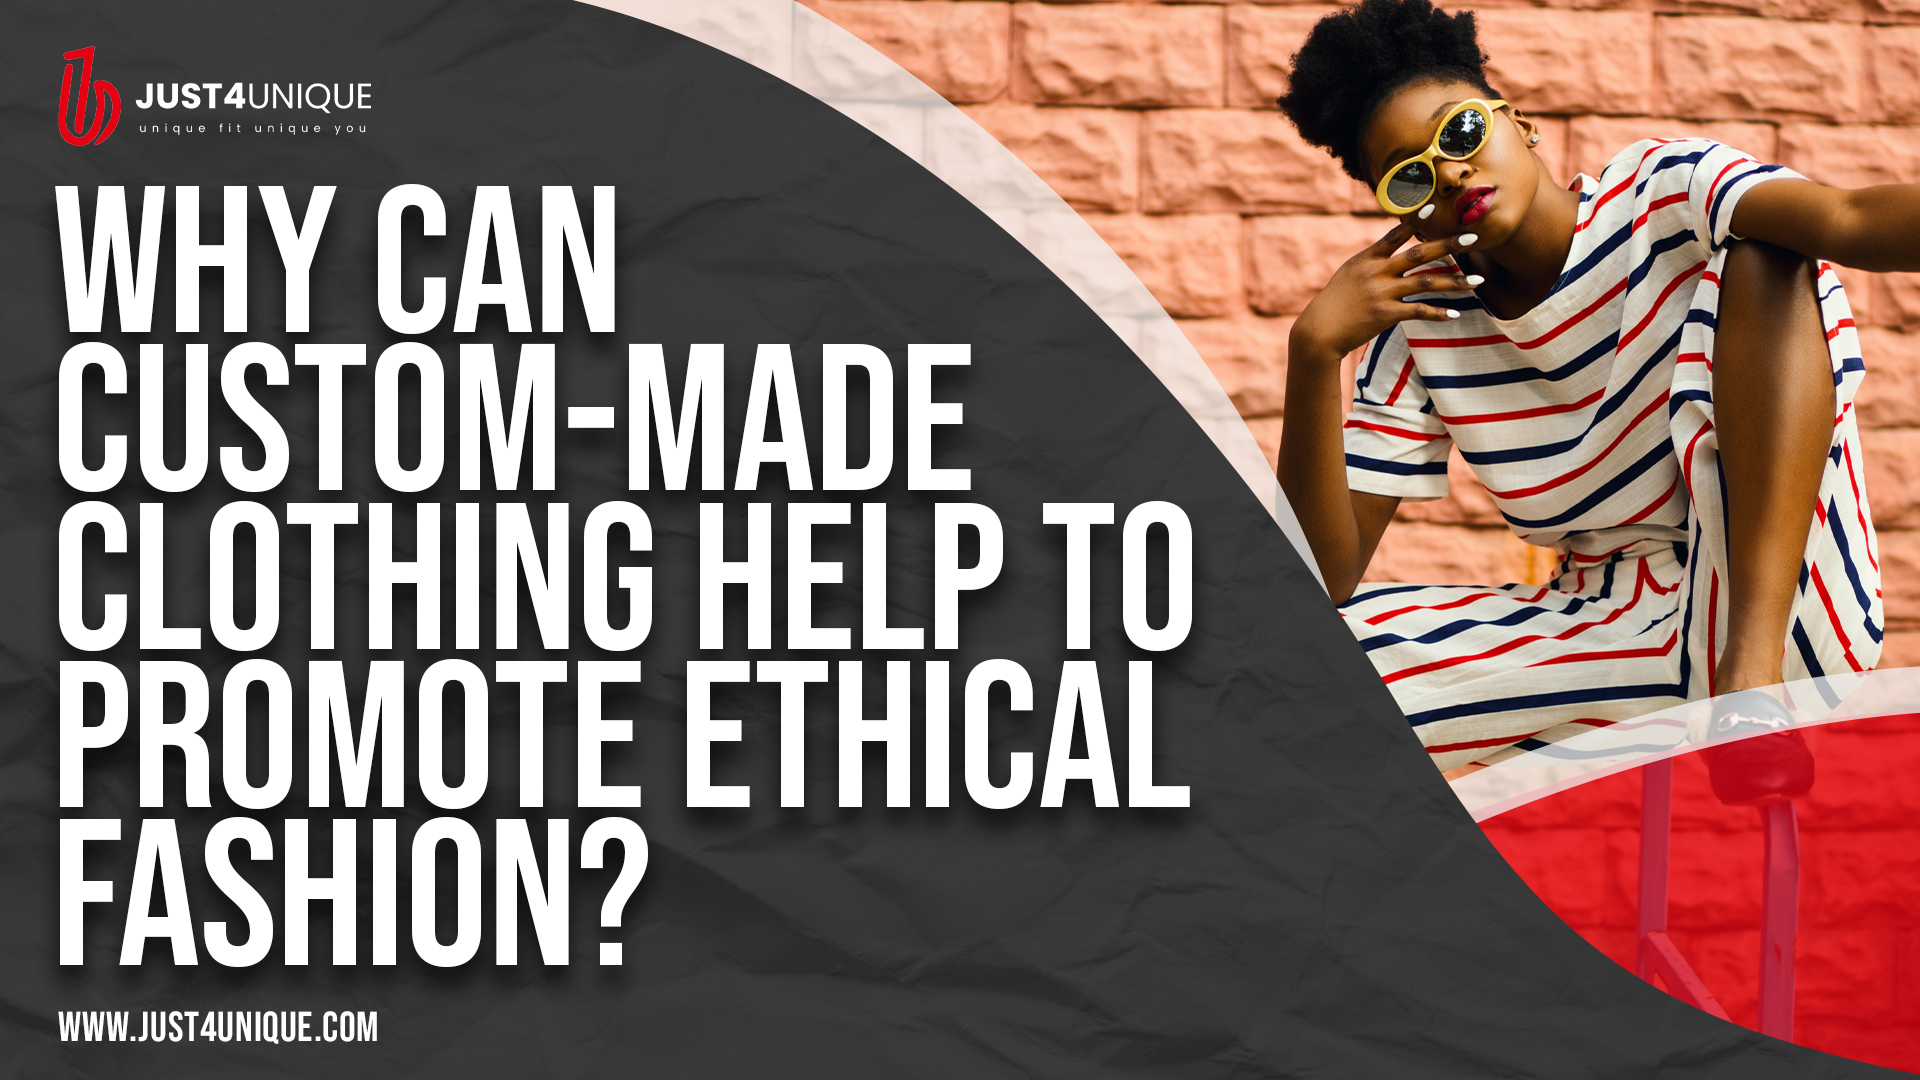 Why Can Custom Made Clothing Help to Promote Ethical Fashion